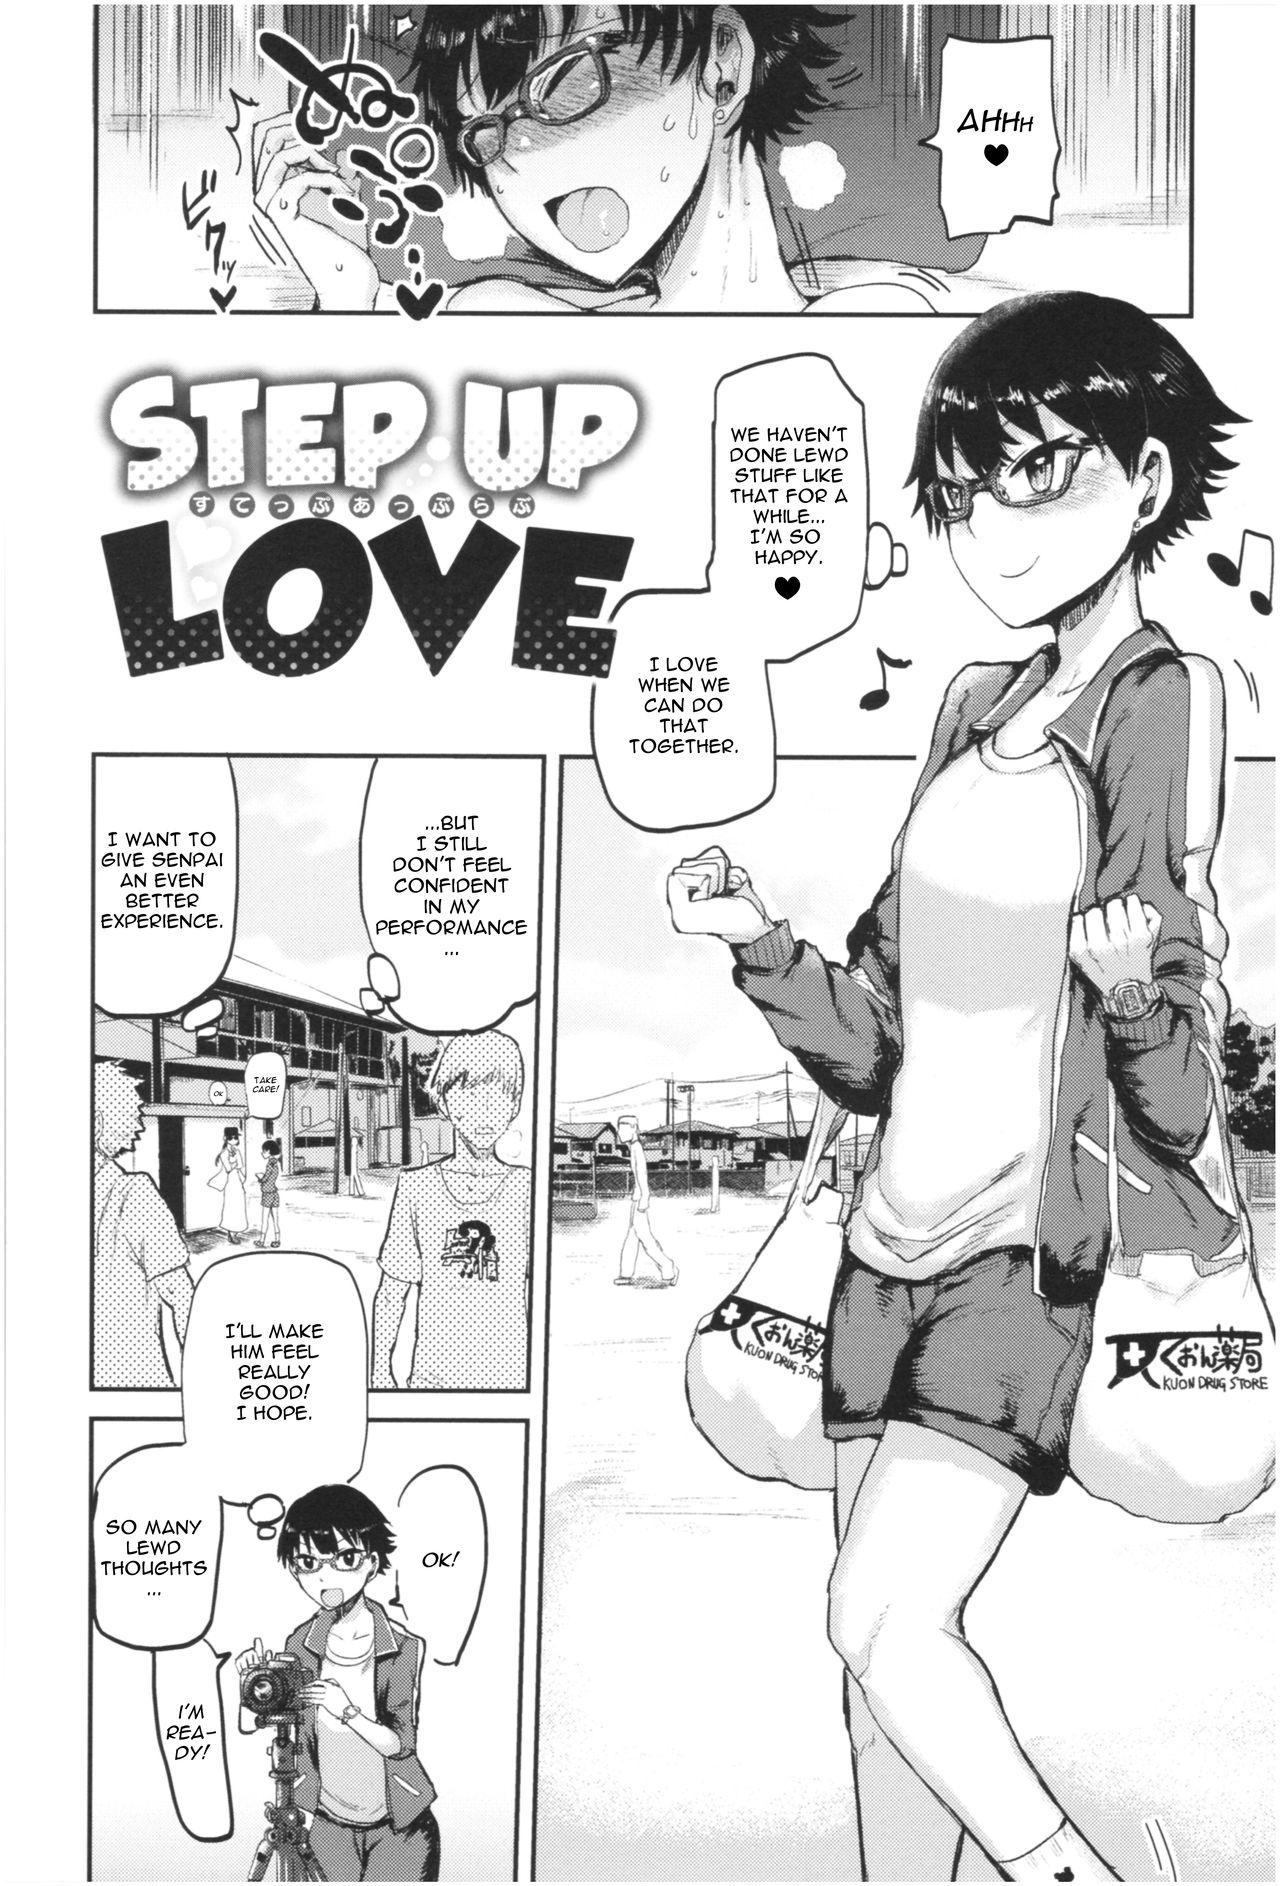 Groupsex STEP UP LOVE Plump - Page 2